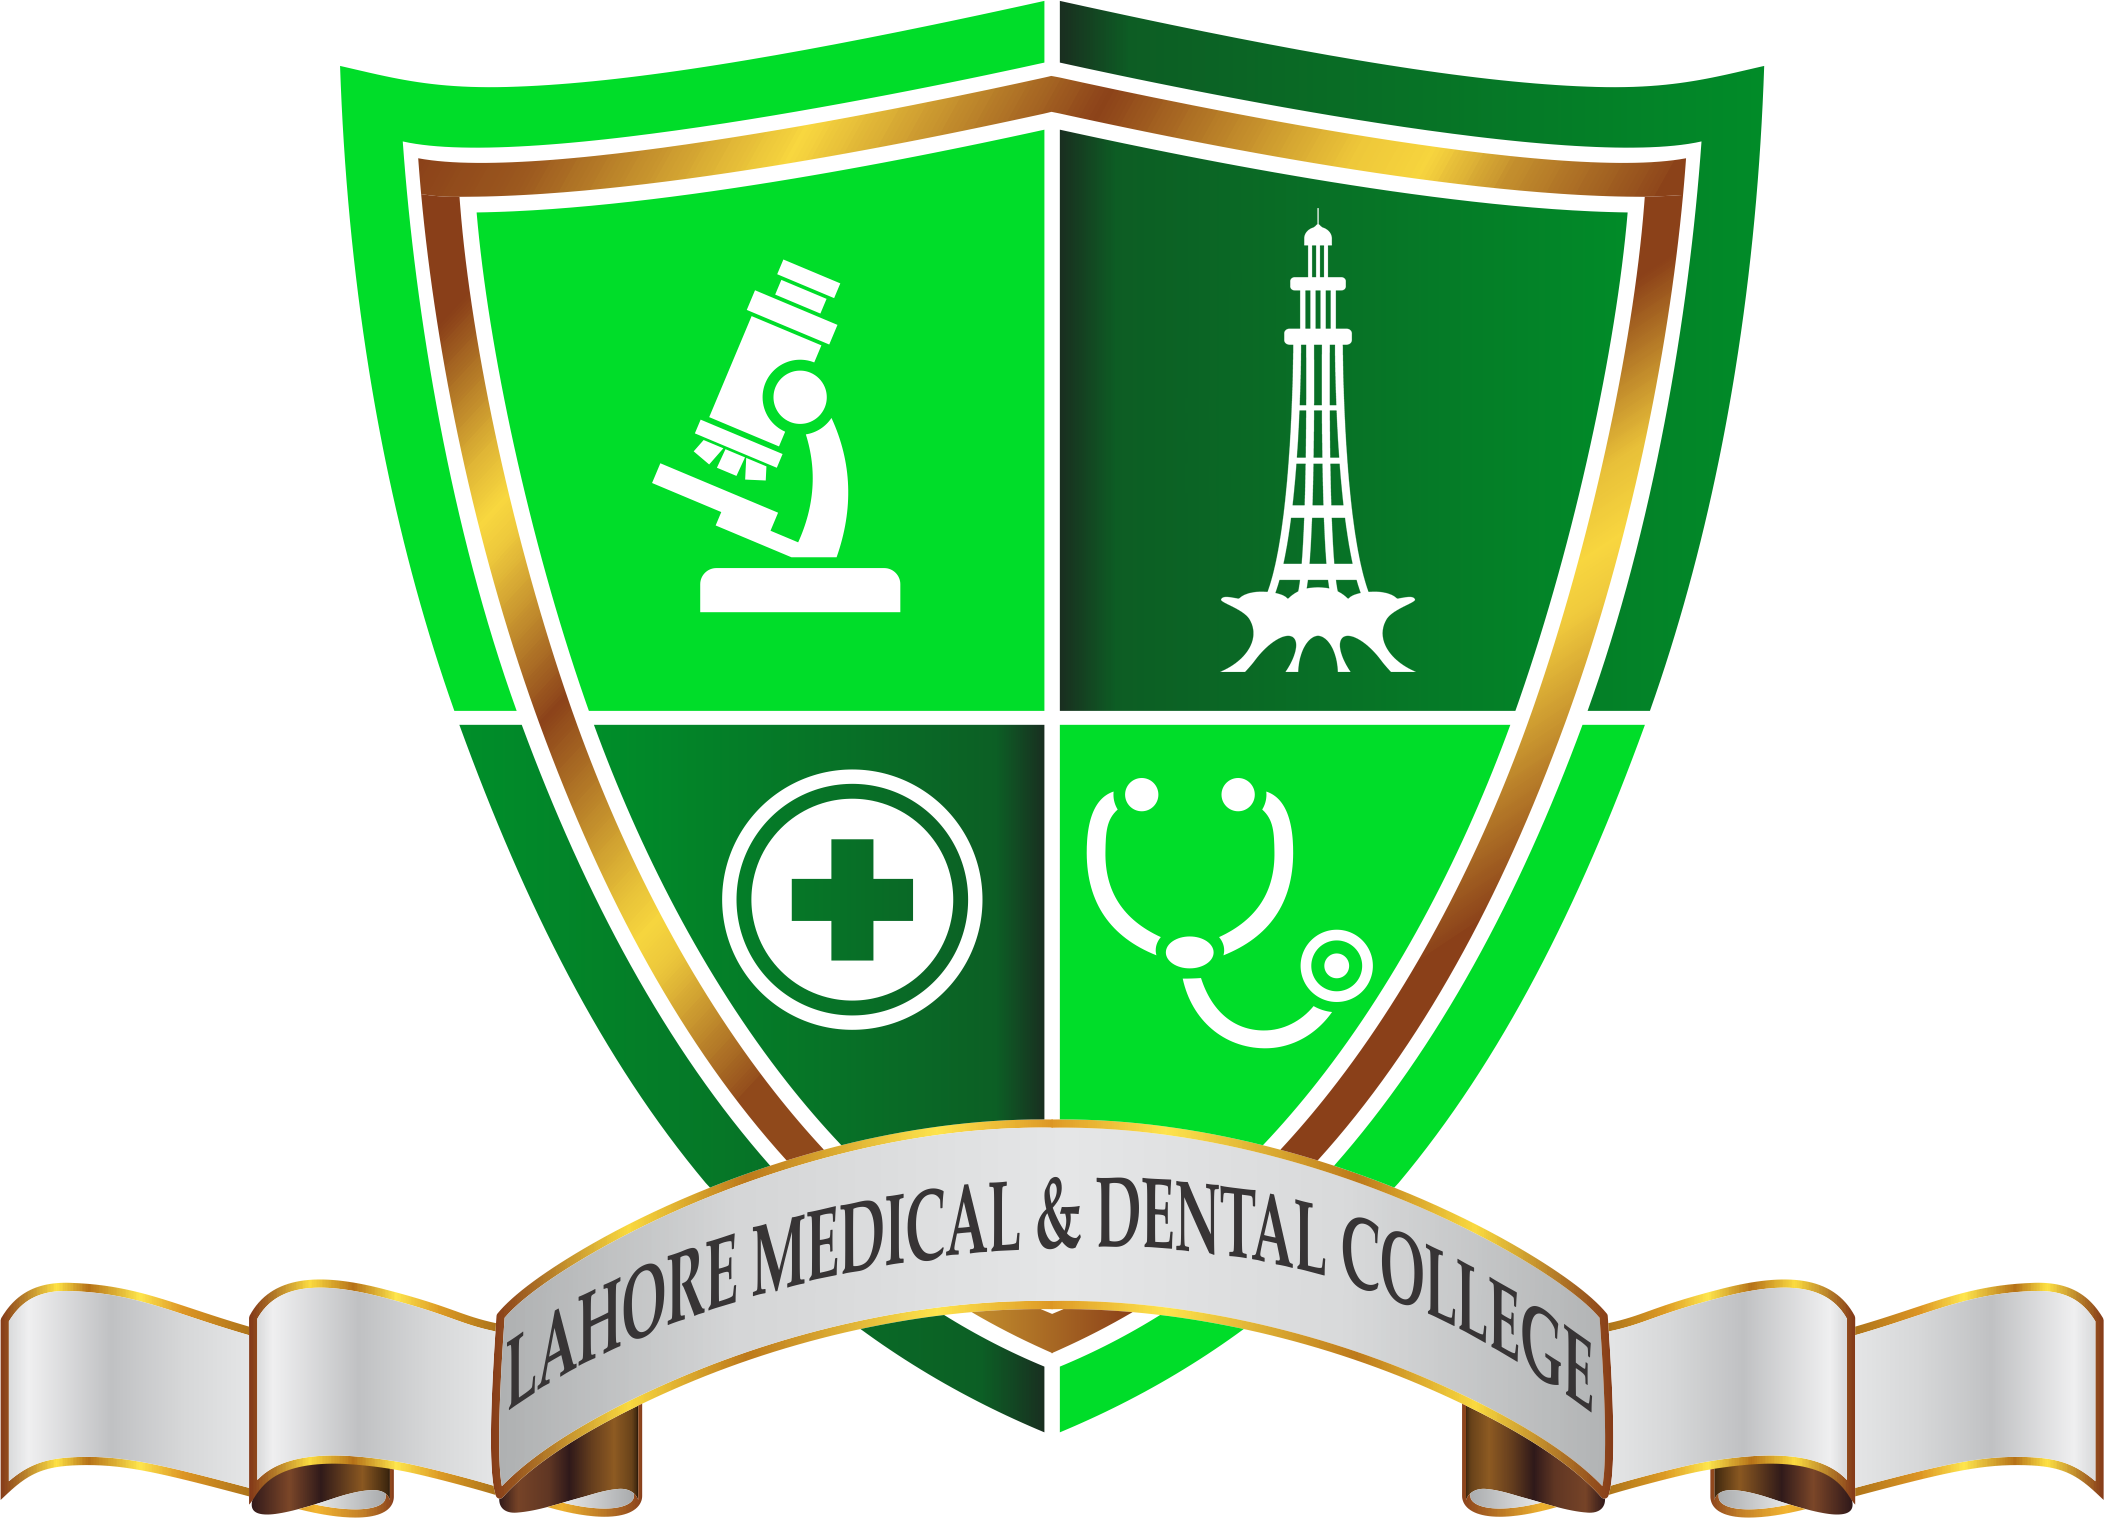 Lahore Medical & Dental College Lahore Admissions